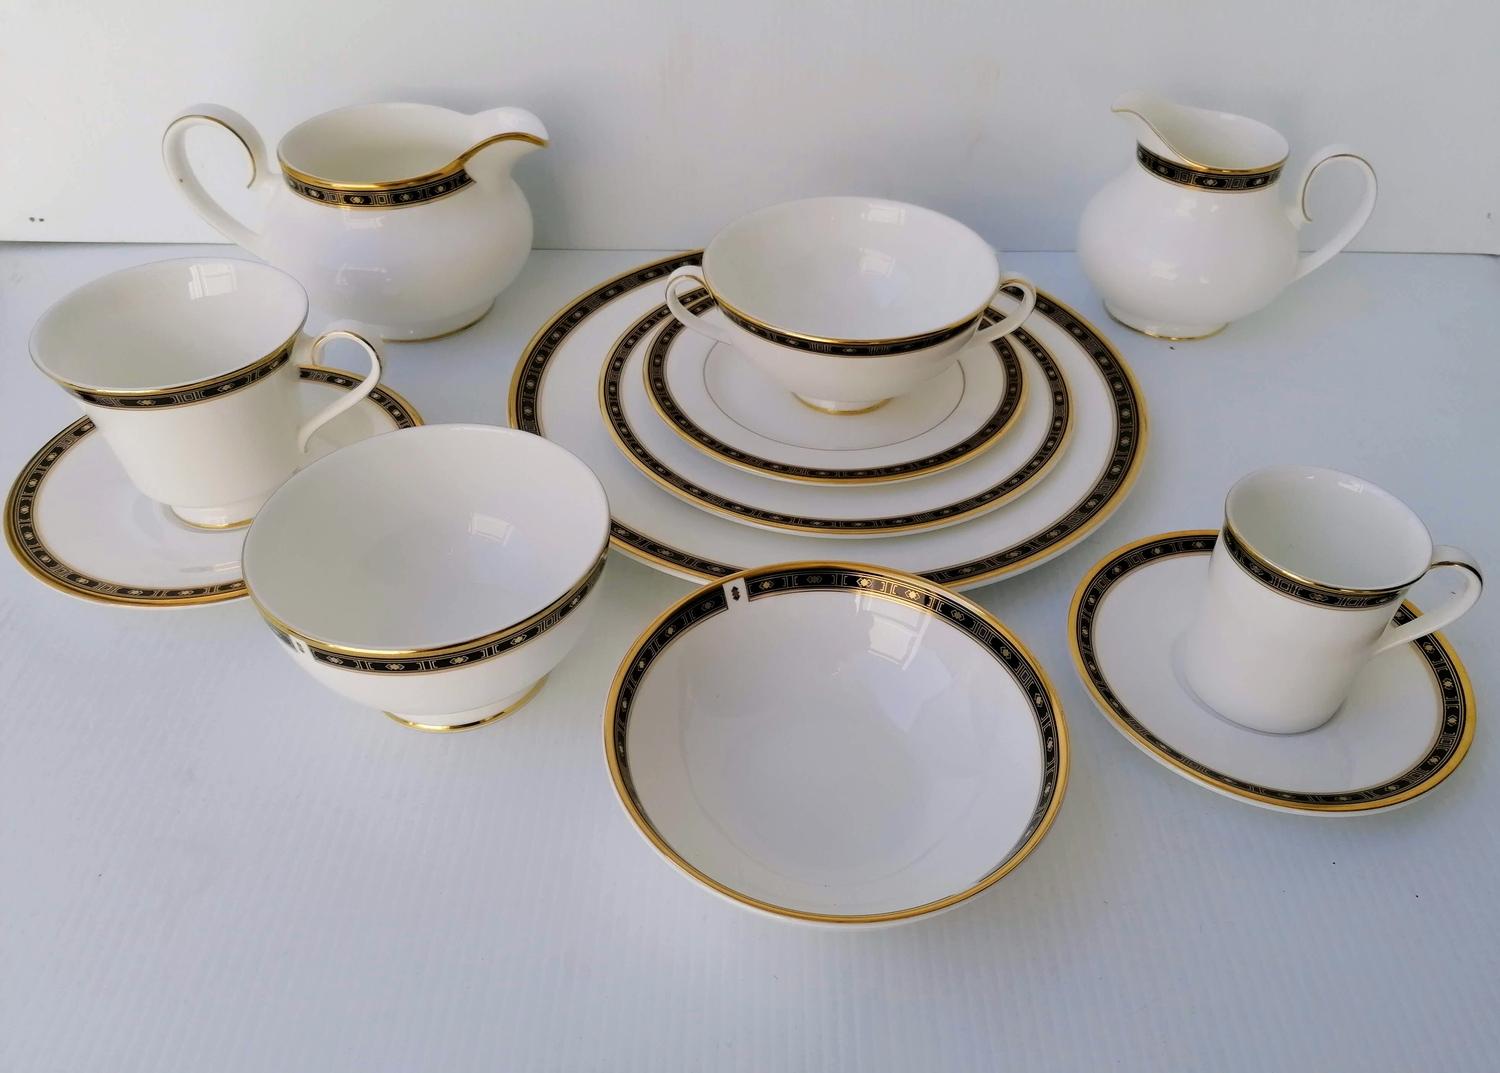 A Royal Doulton Monaco dinner sixty-three piece service, H5133 comprising: 10" dinner plates x 6, 8"